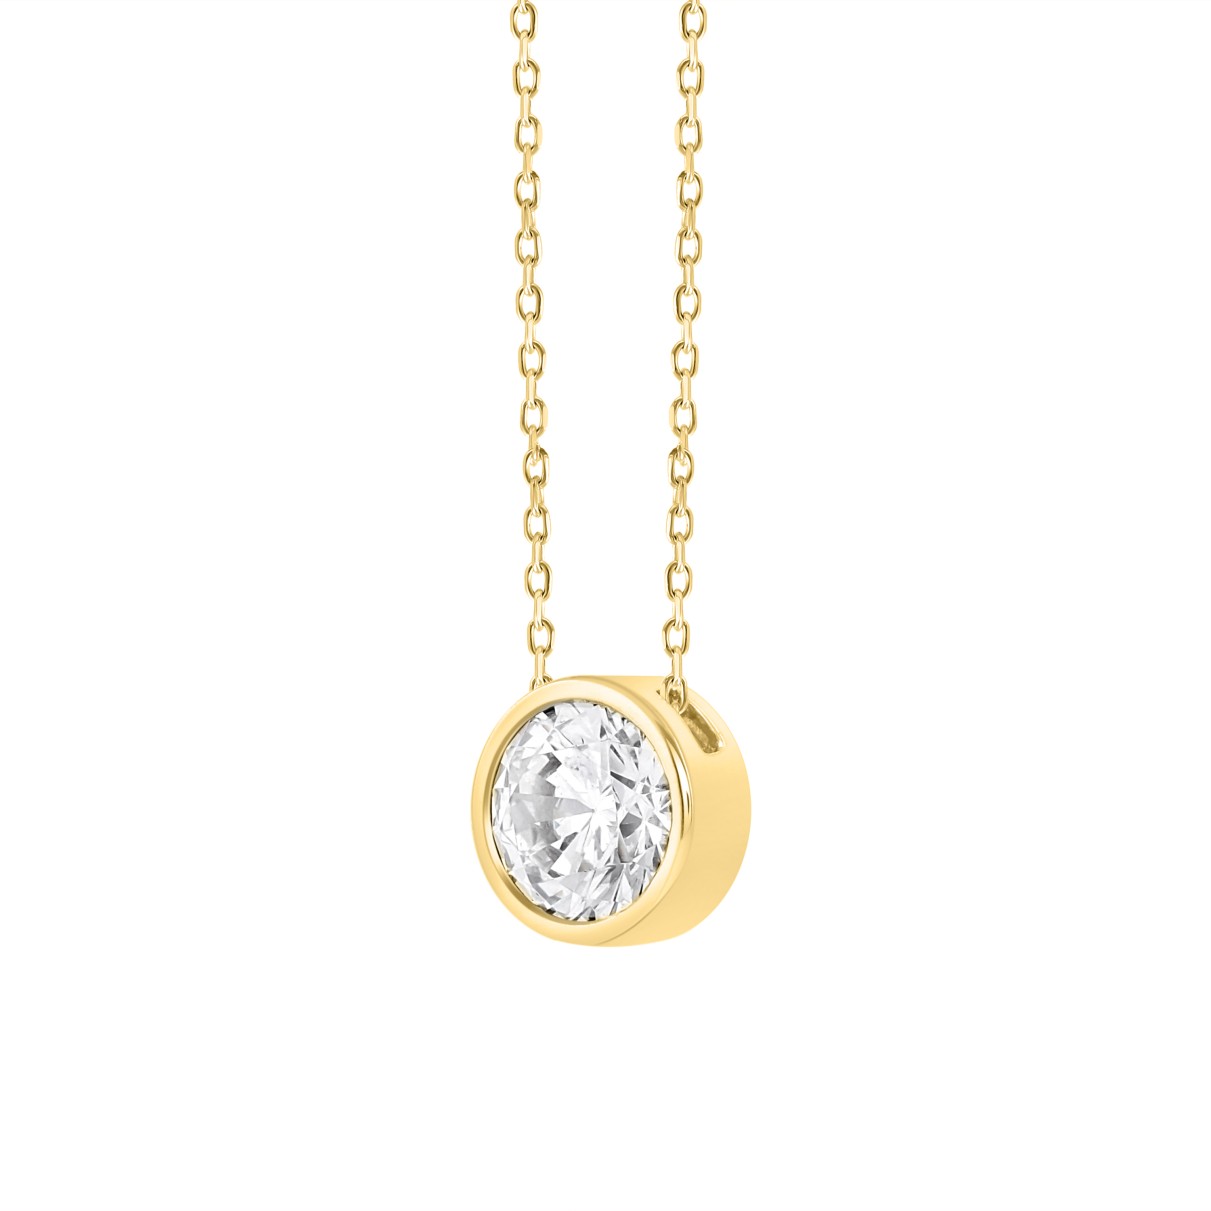 LADIES SOLITAIRE PENDANT 1CT ROUND DIAMOND 14K YELLOW GOLD WITH CHAIN